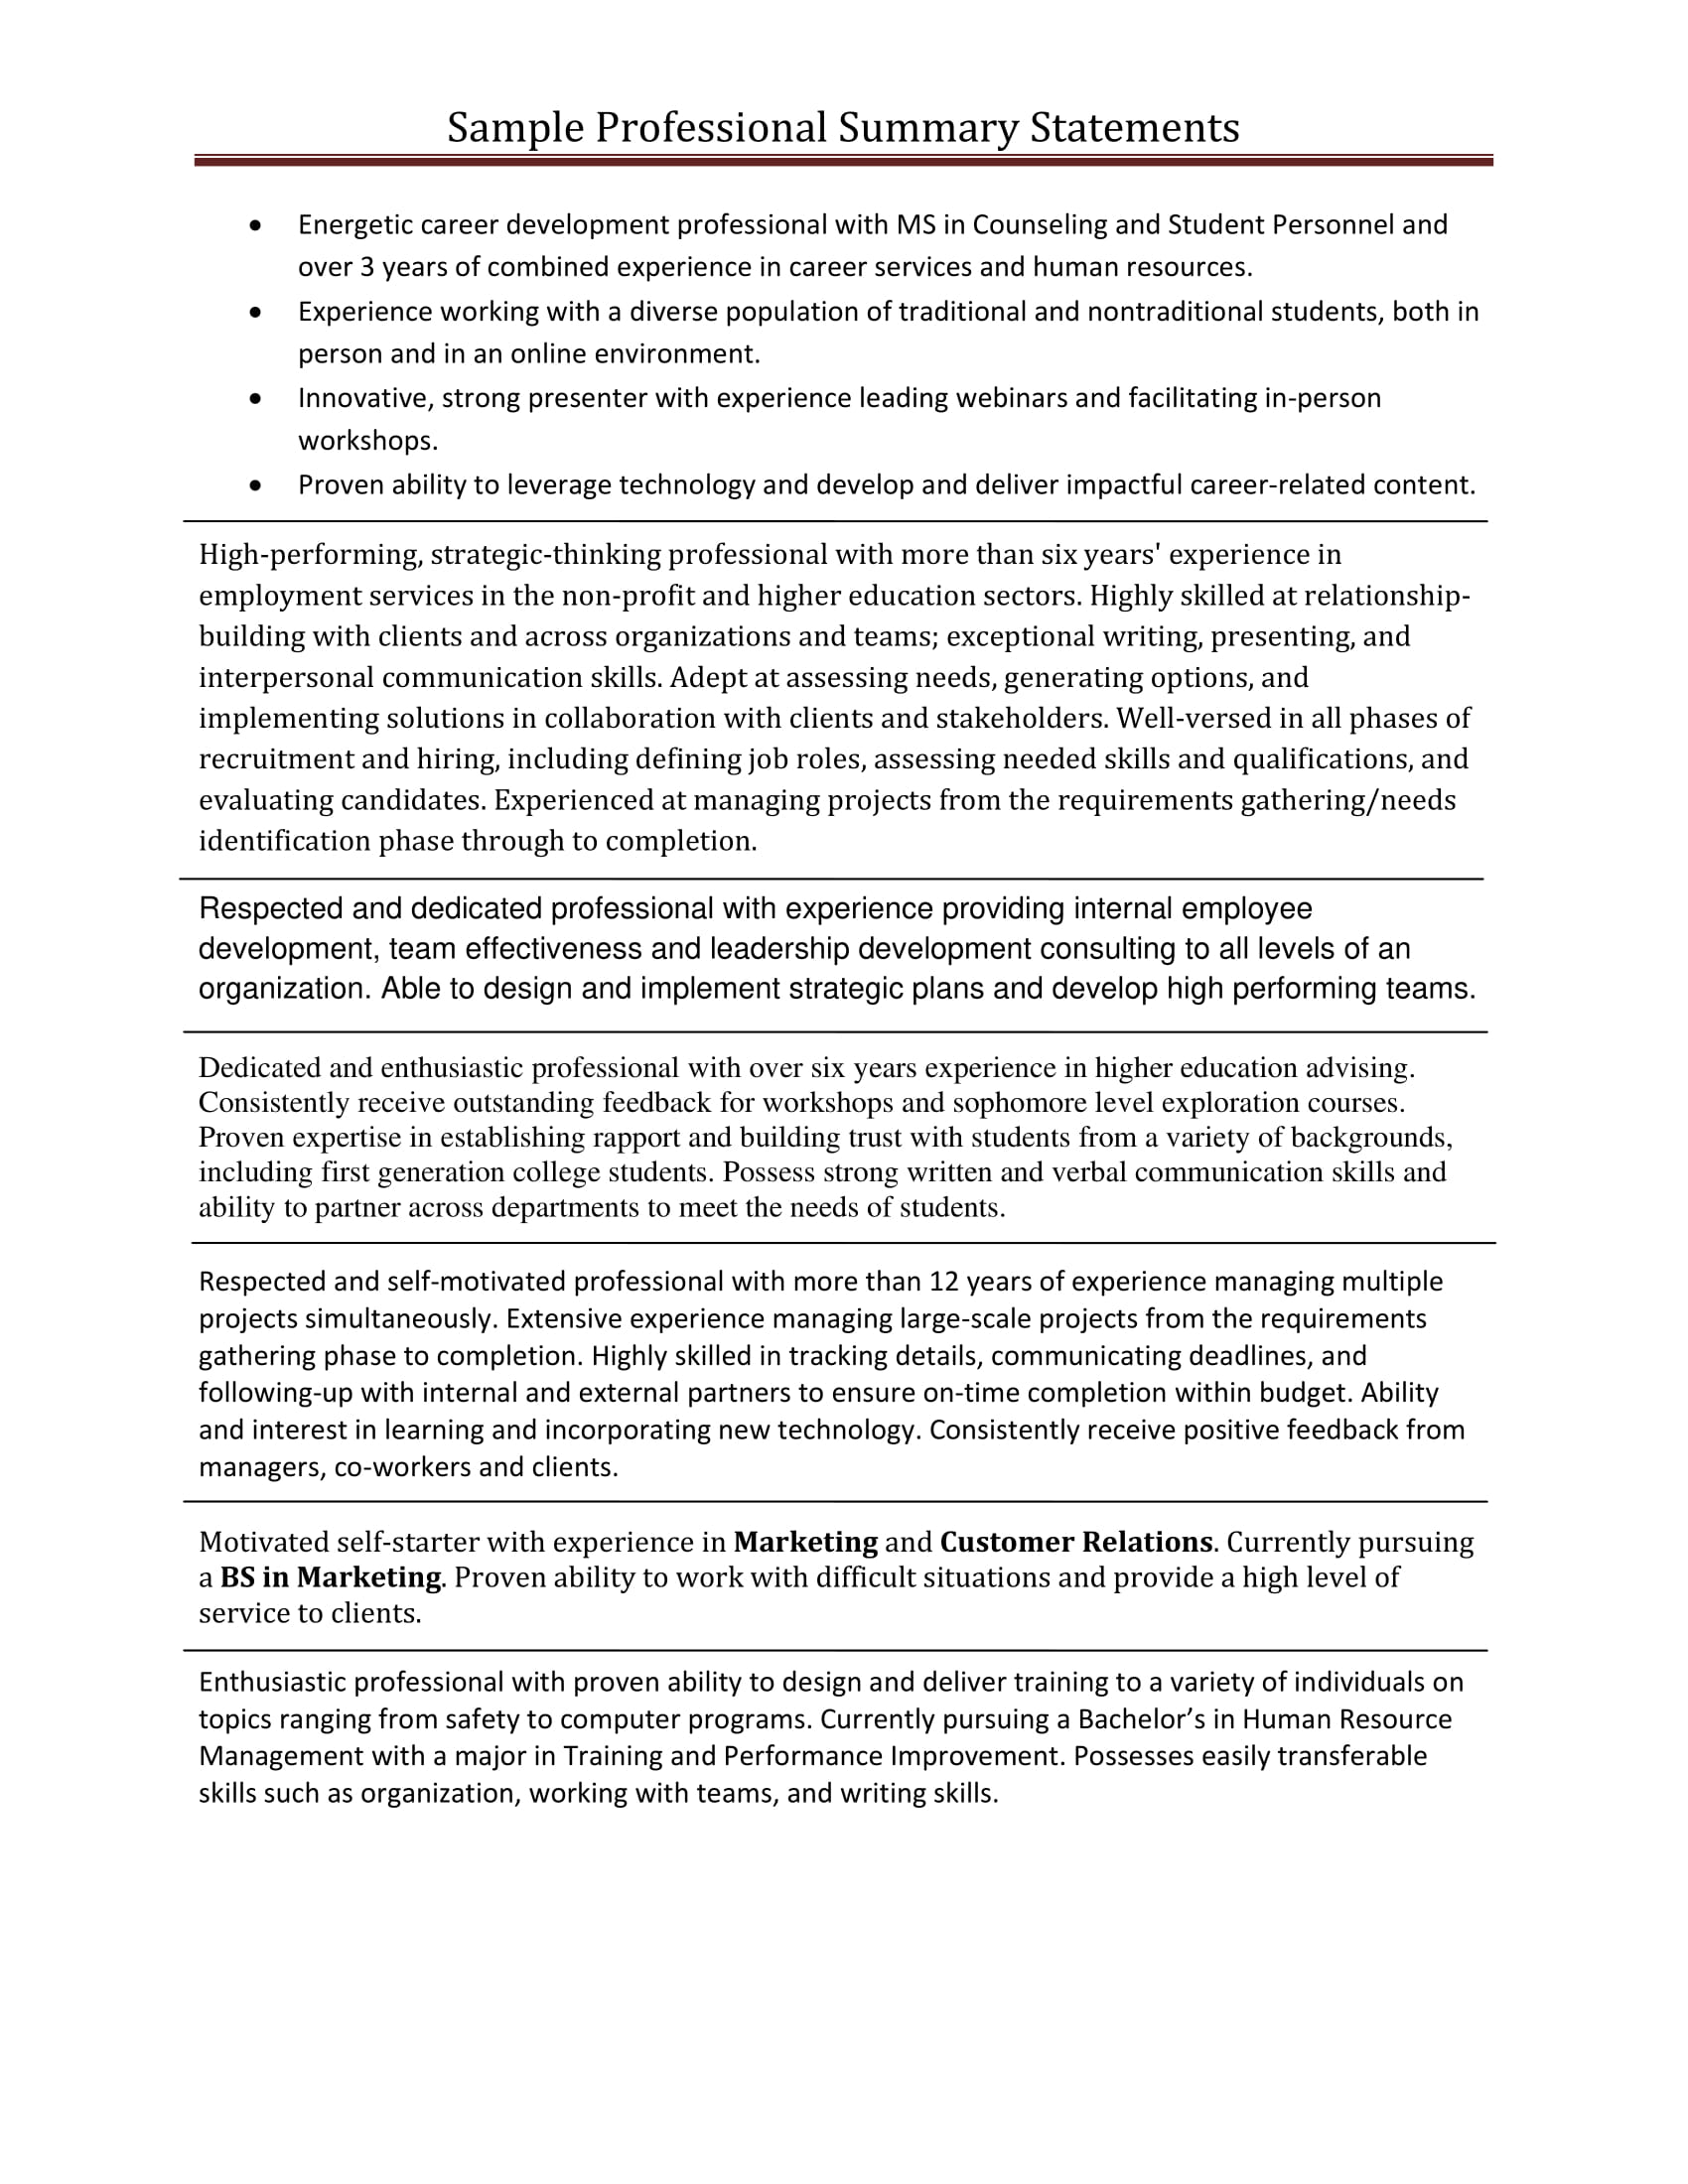 Leadership in hospitality industry essay resume place inc